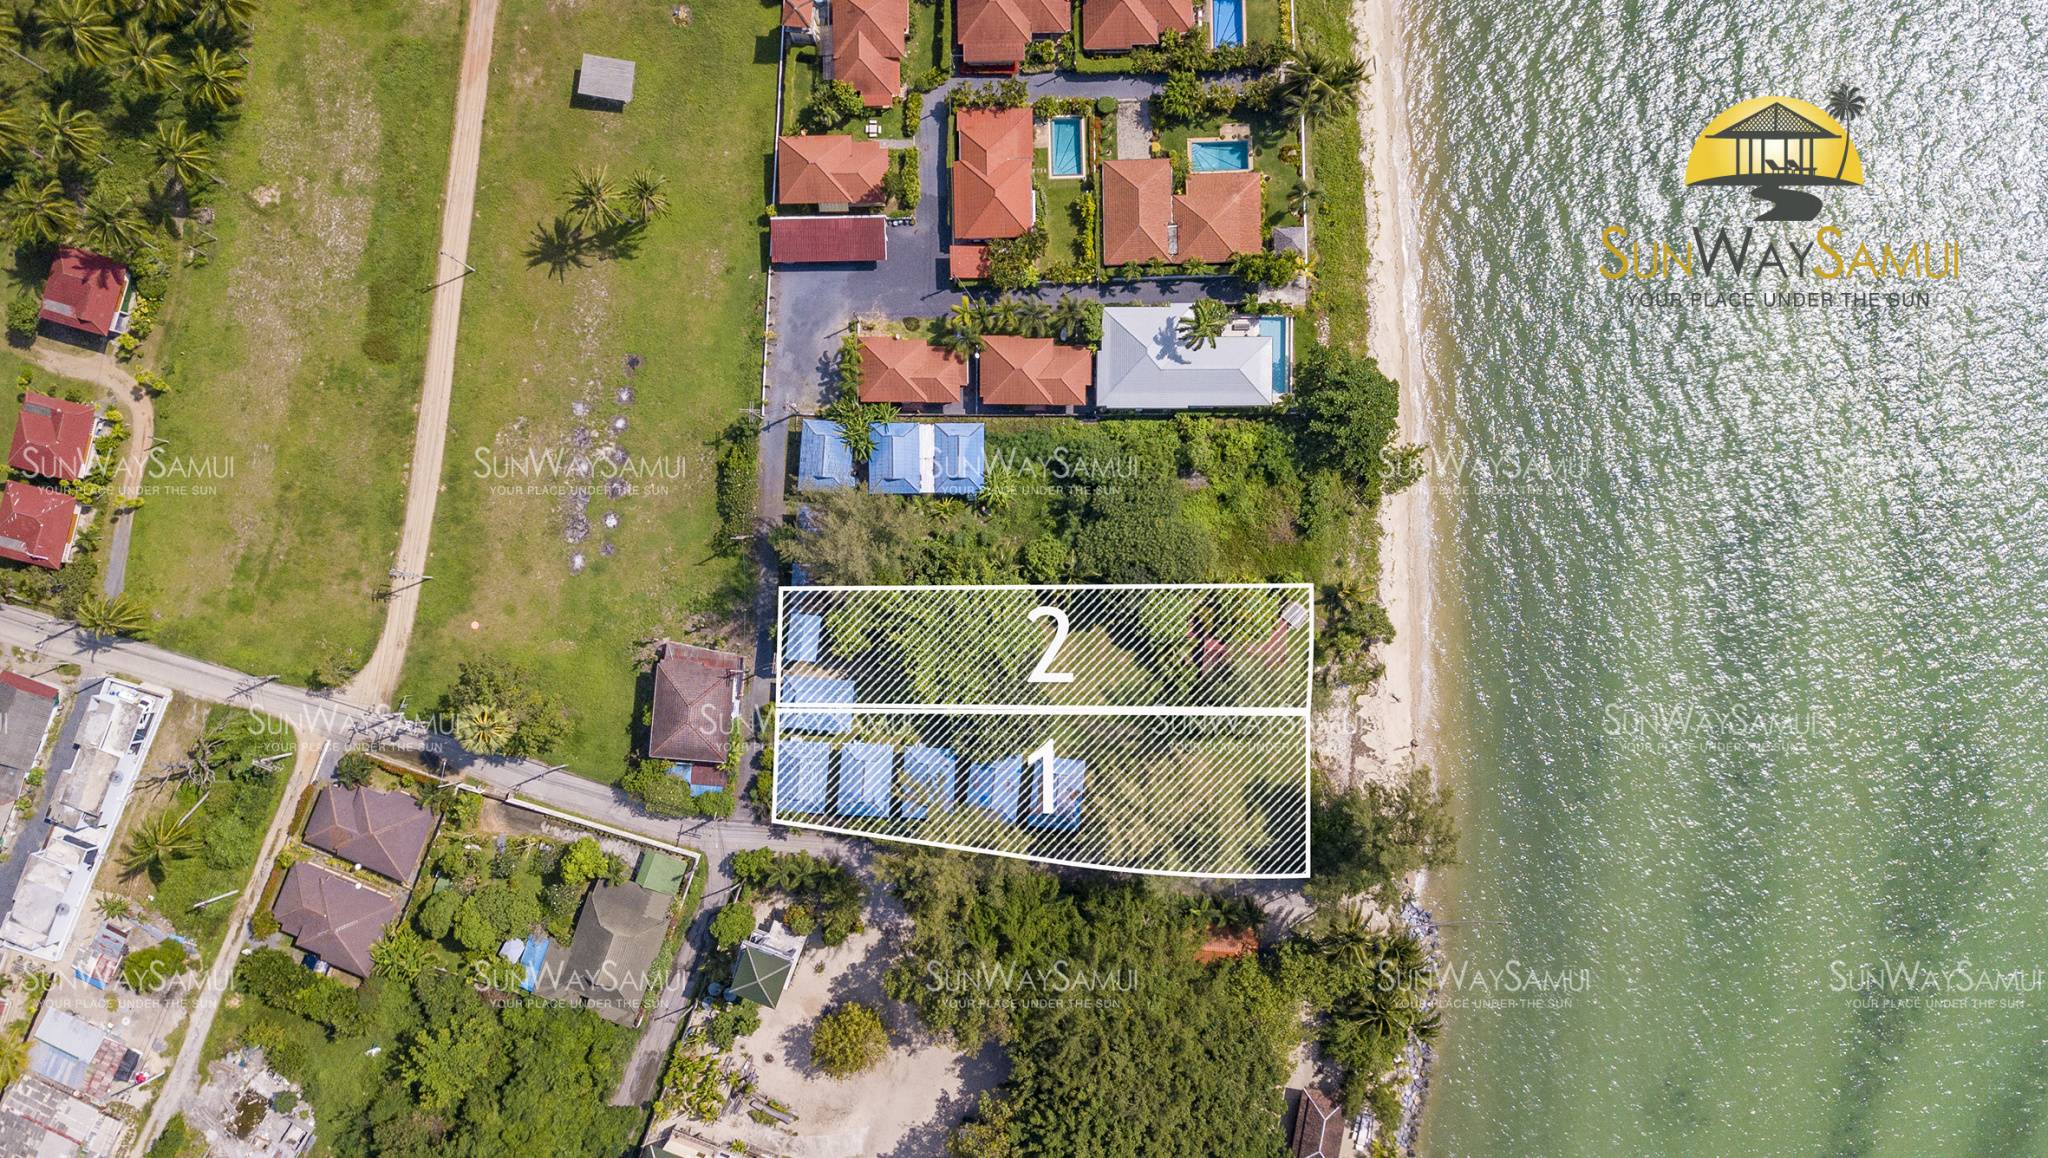 Beachfront Lipanoi land for sale with house and bungalows: Beachfront Lipanoi land for sale 